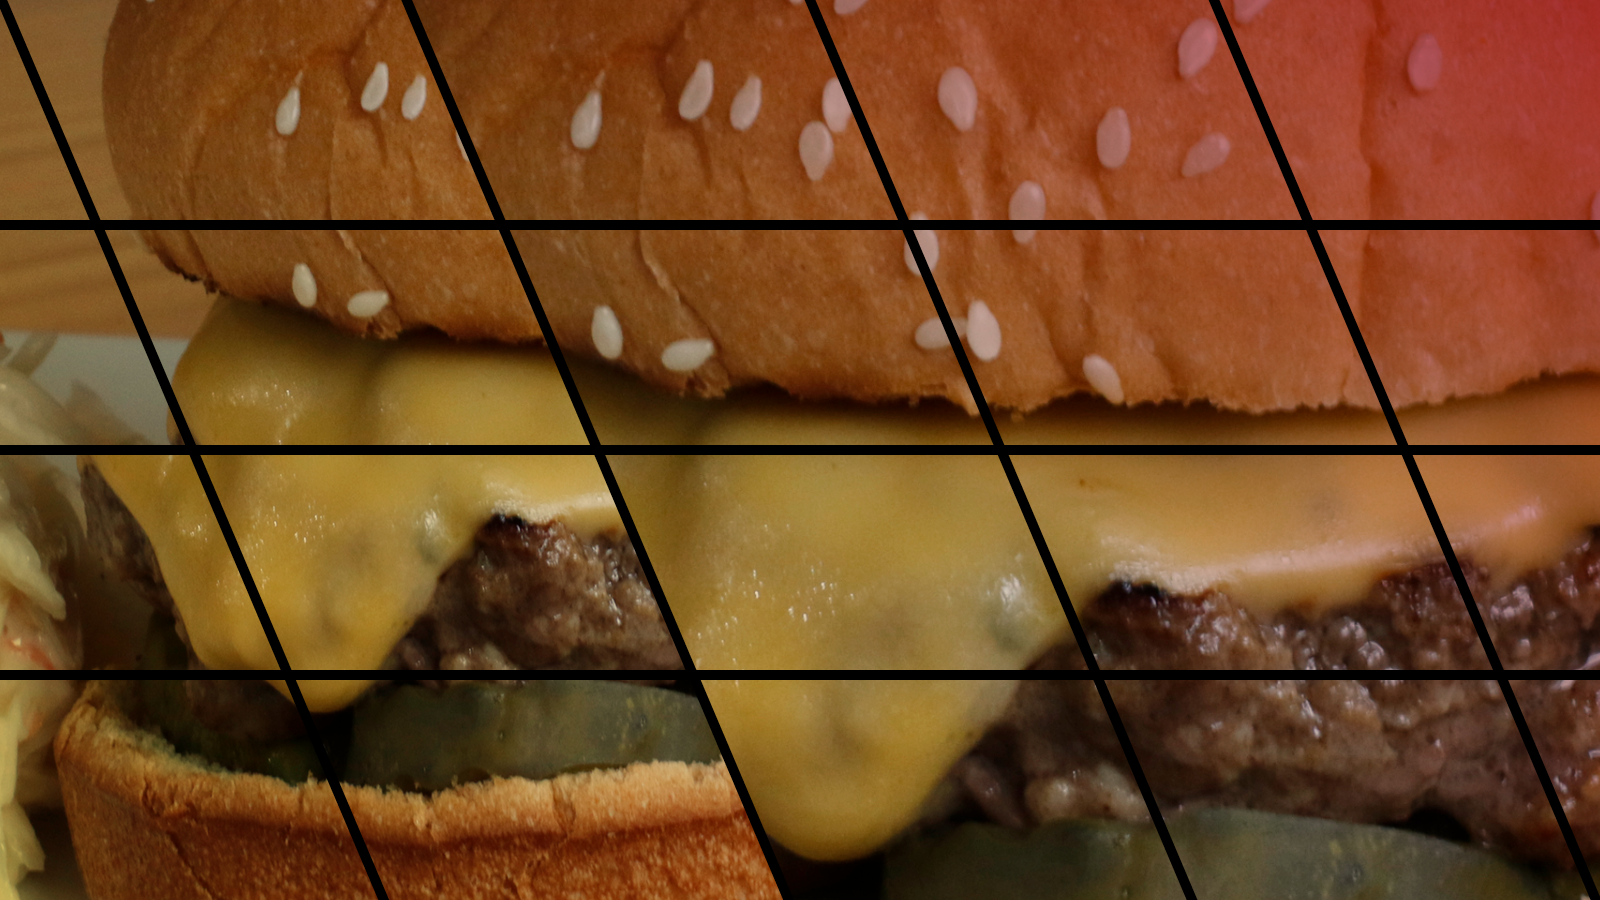 An up-close of a cheeseburger, showing a sesame seed bun, melted cheese, a beef patty, and pickles.